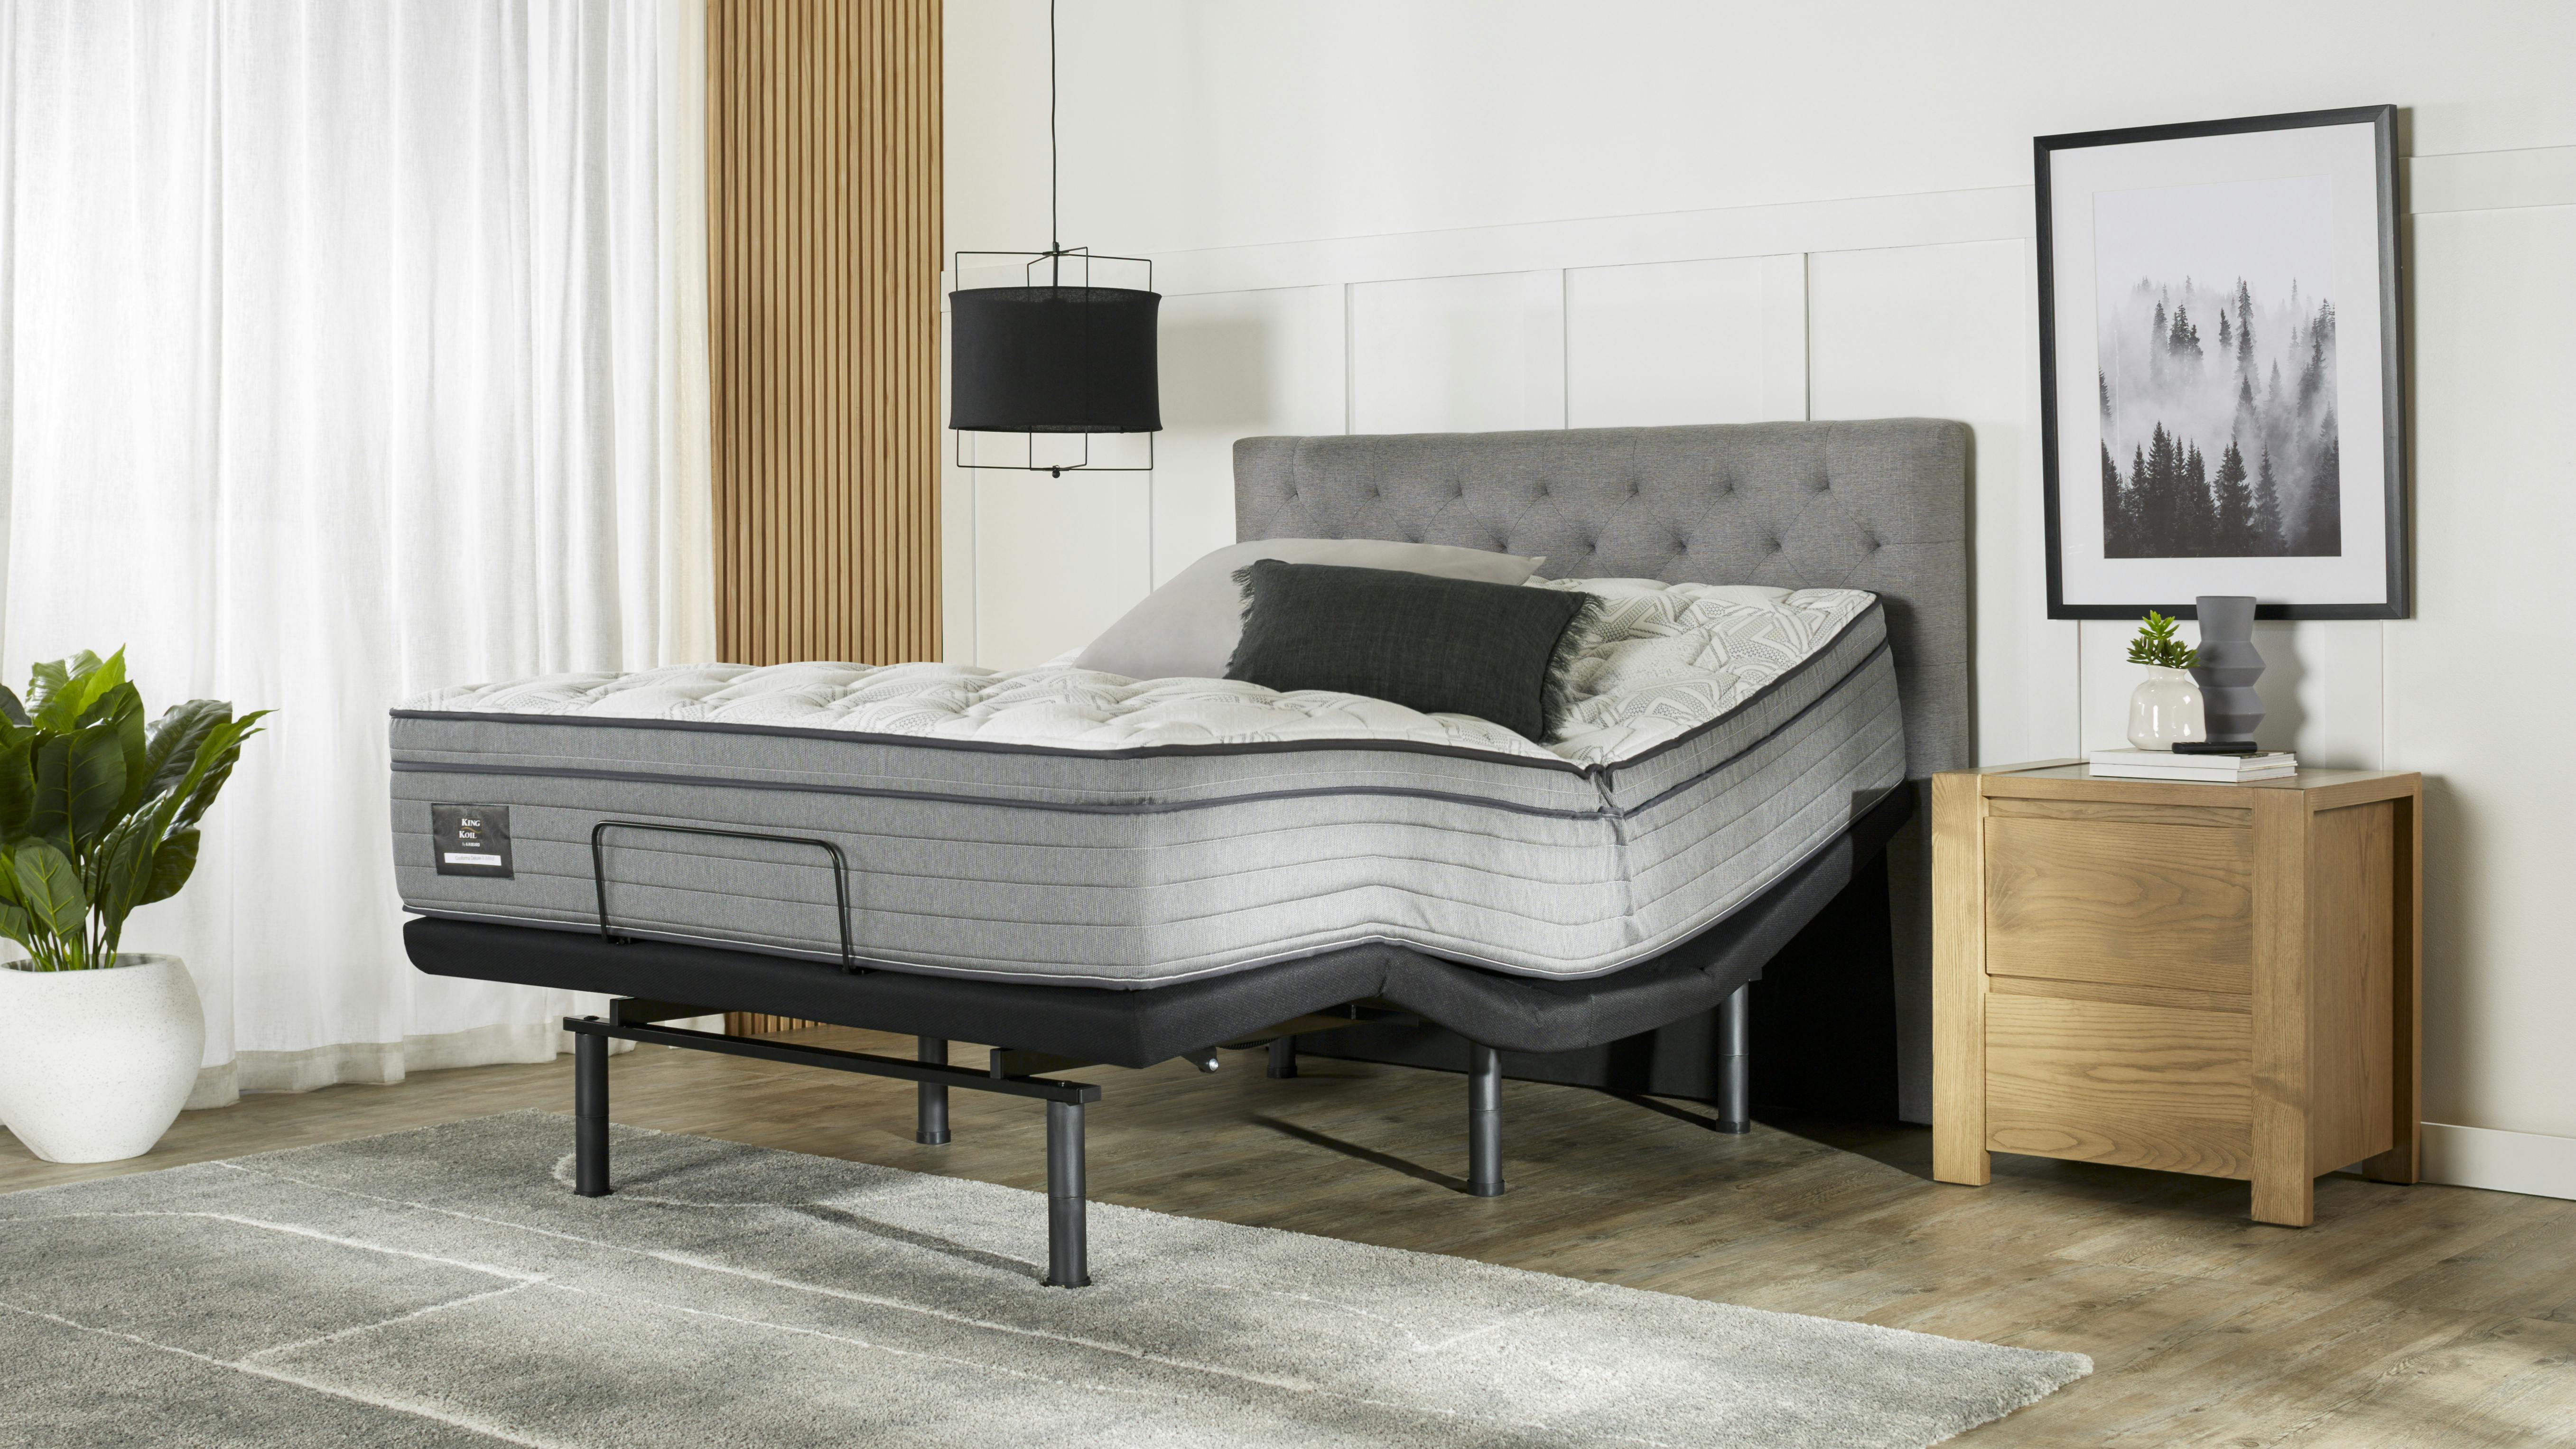 King Koil Conforma Delxue II Medium Queen Mattress with Virtue Adjustable Base by A.H Beard